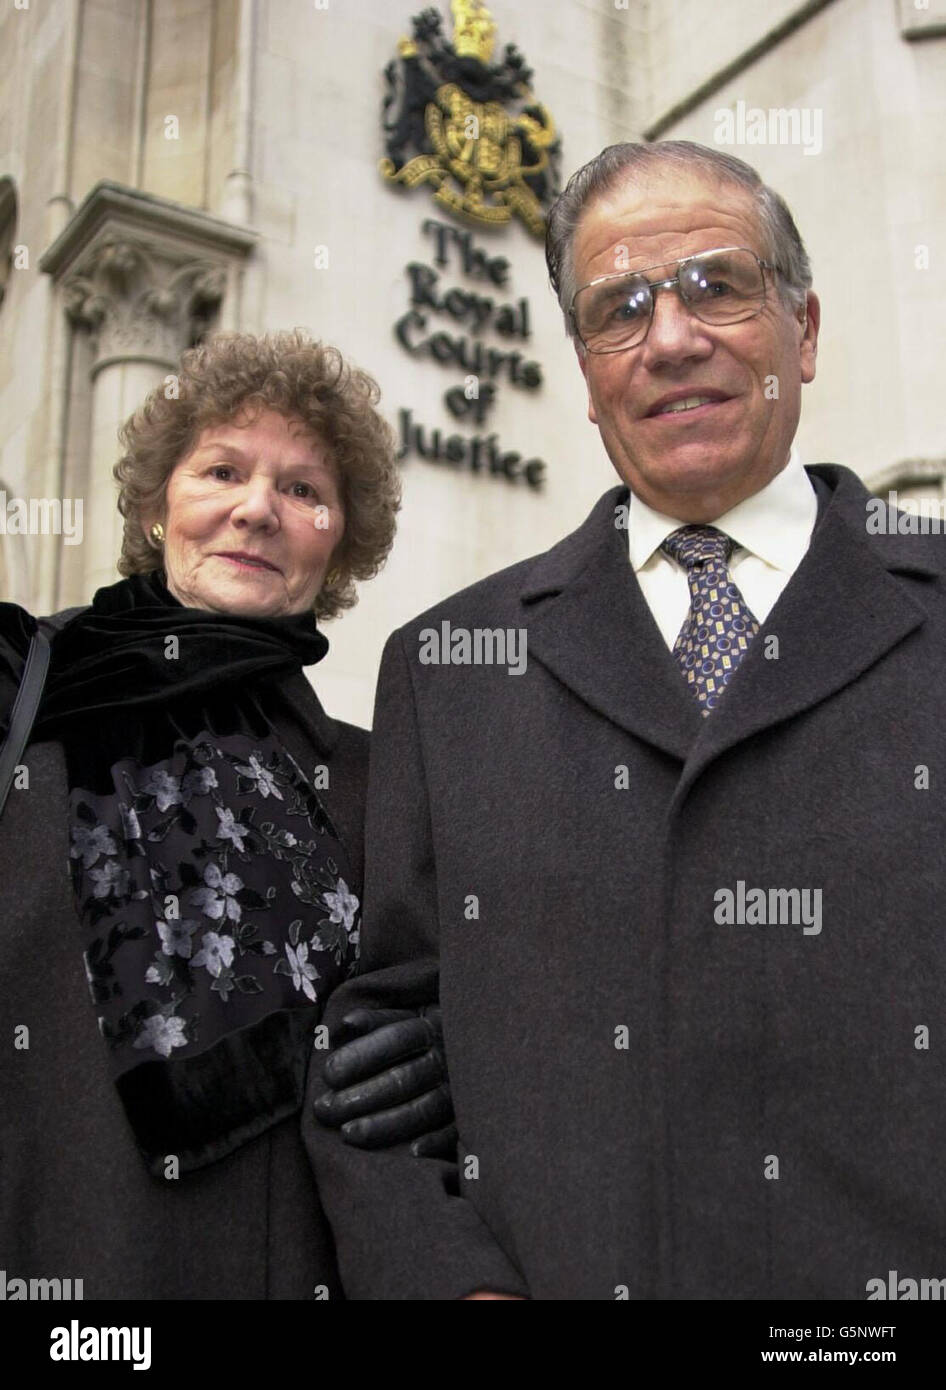 East Anglian farmer, David Winter, 70, from Halesworth, Suffolk outside the High Court, London, with his wife, Pauline having been cleared of causing a road accident blamed on mud from his farm land. * ... Mr Winter was charged with manslaughter after a motorist - doctor's wife and retired midwife Jennifer Townsley, 59, was fatally injured in a collision on a muddy road outside his farm but cleared after the prosecution offered no evidence. Stock Photo